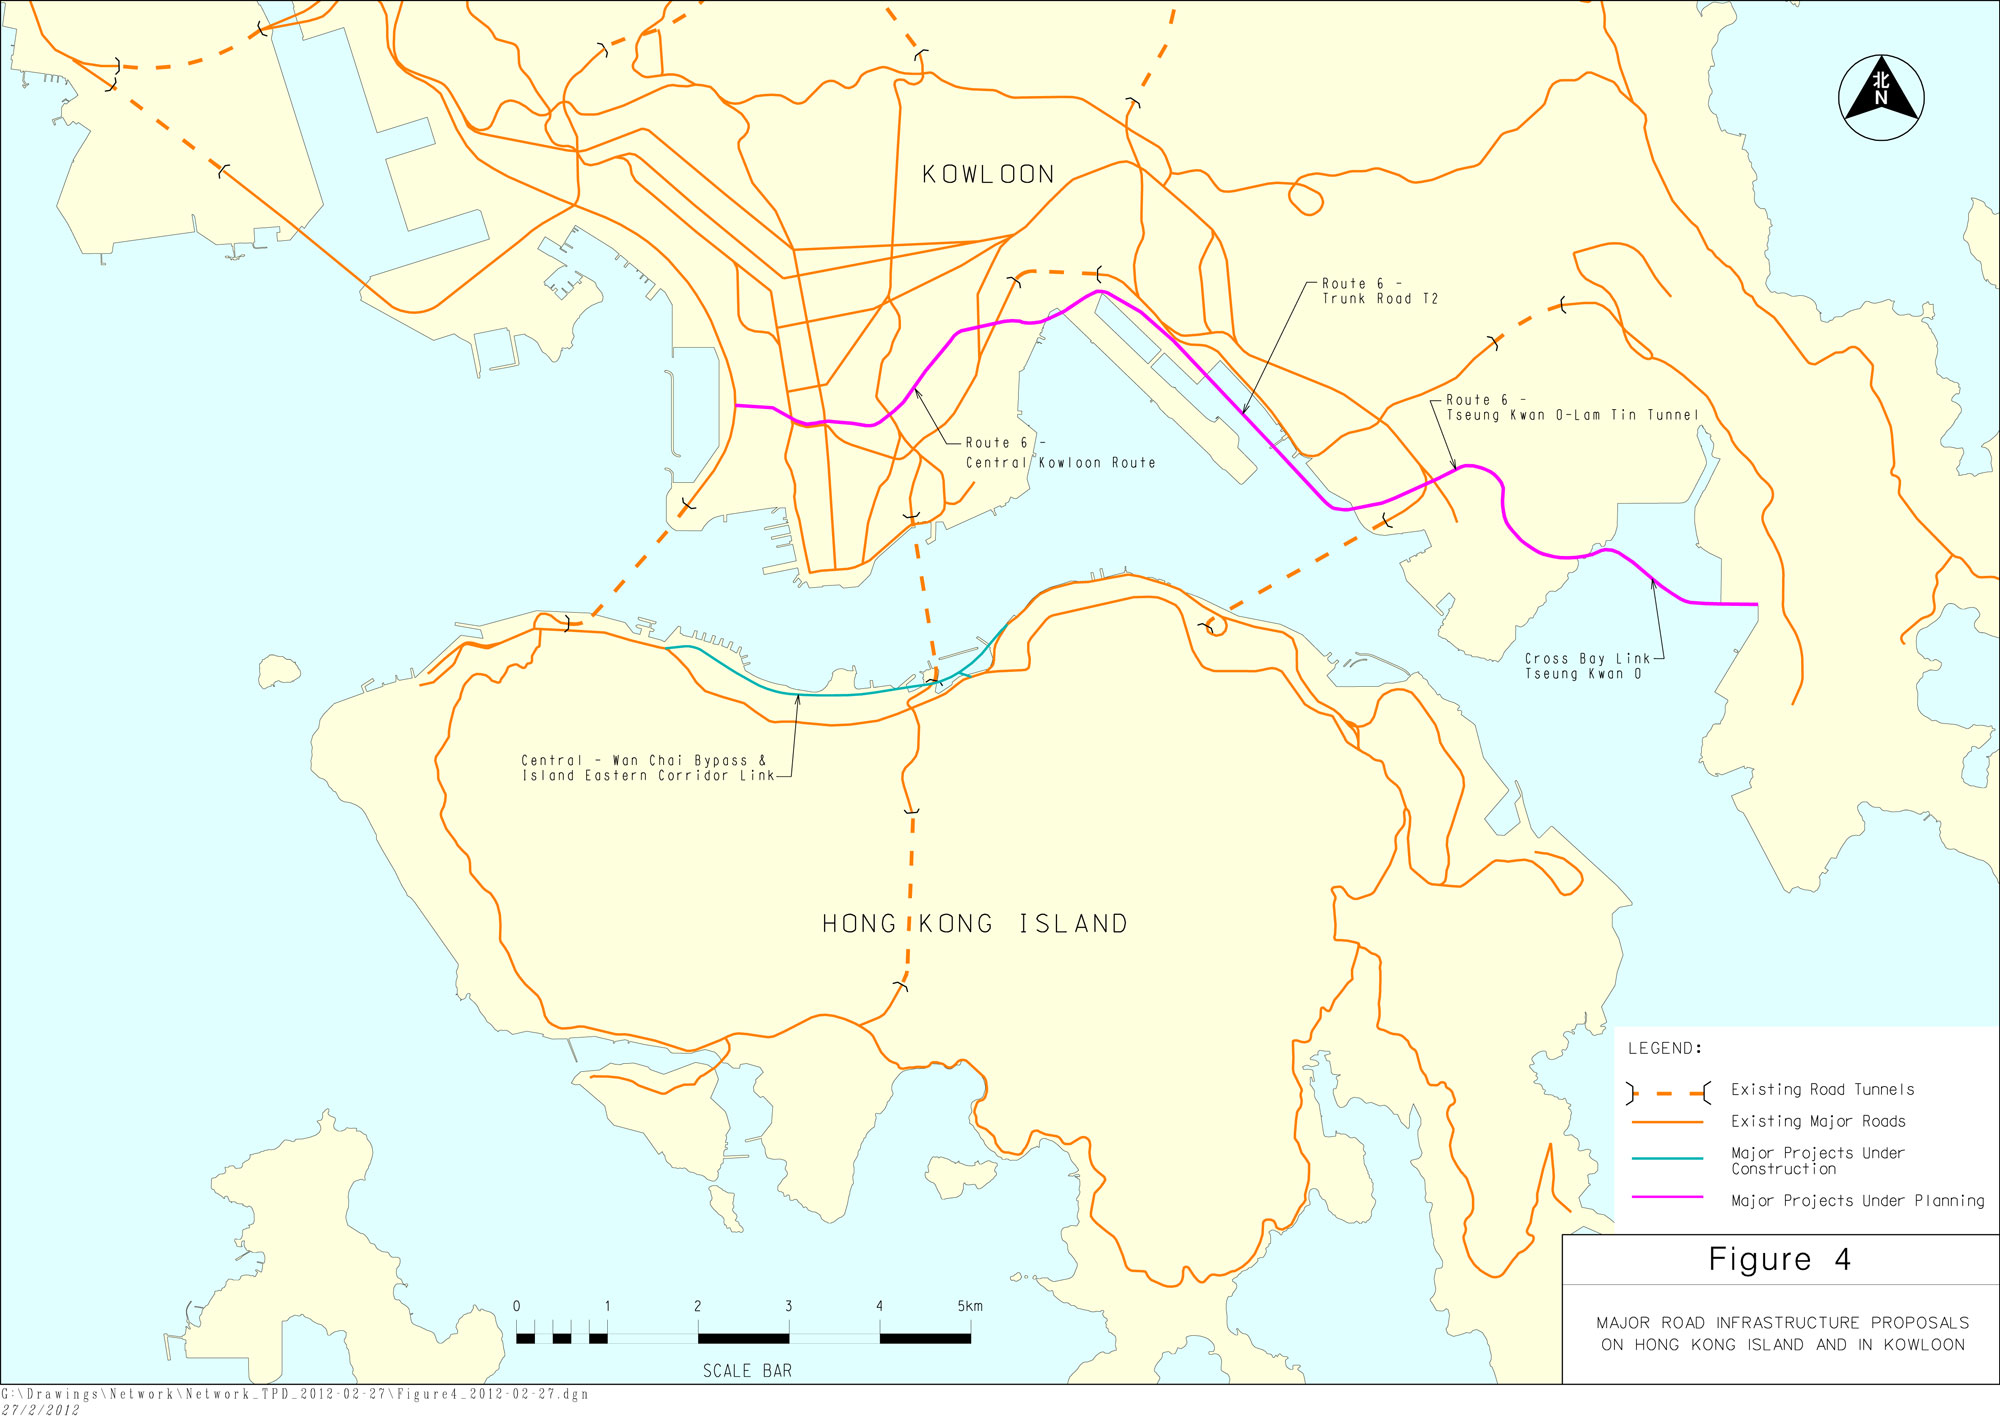 Figure 4 shows the major road infrastructure proposals on Hong Kong Island and in Kowloon. Description text is below the figure. For project details, please click Table 1.1.  